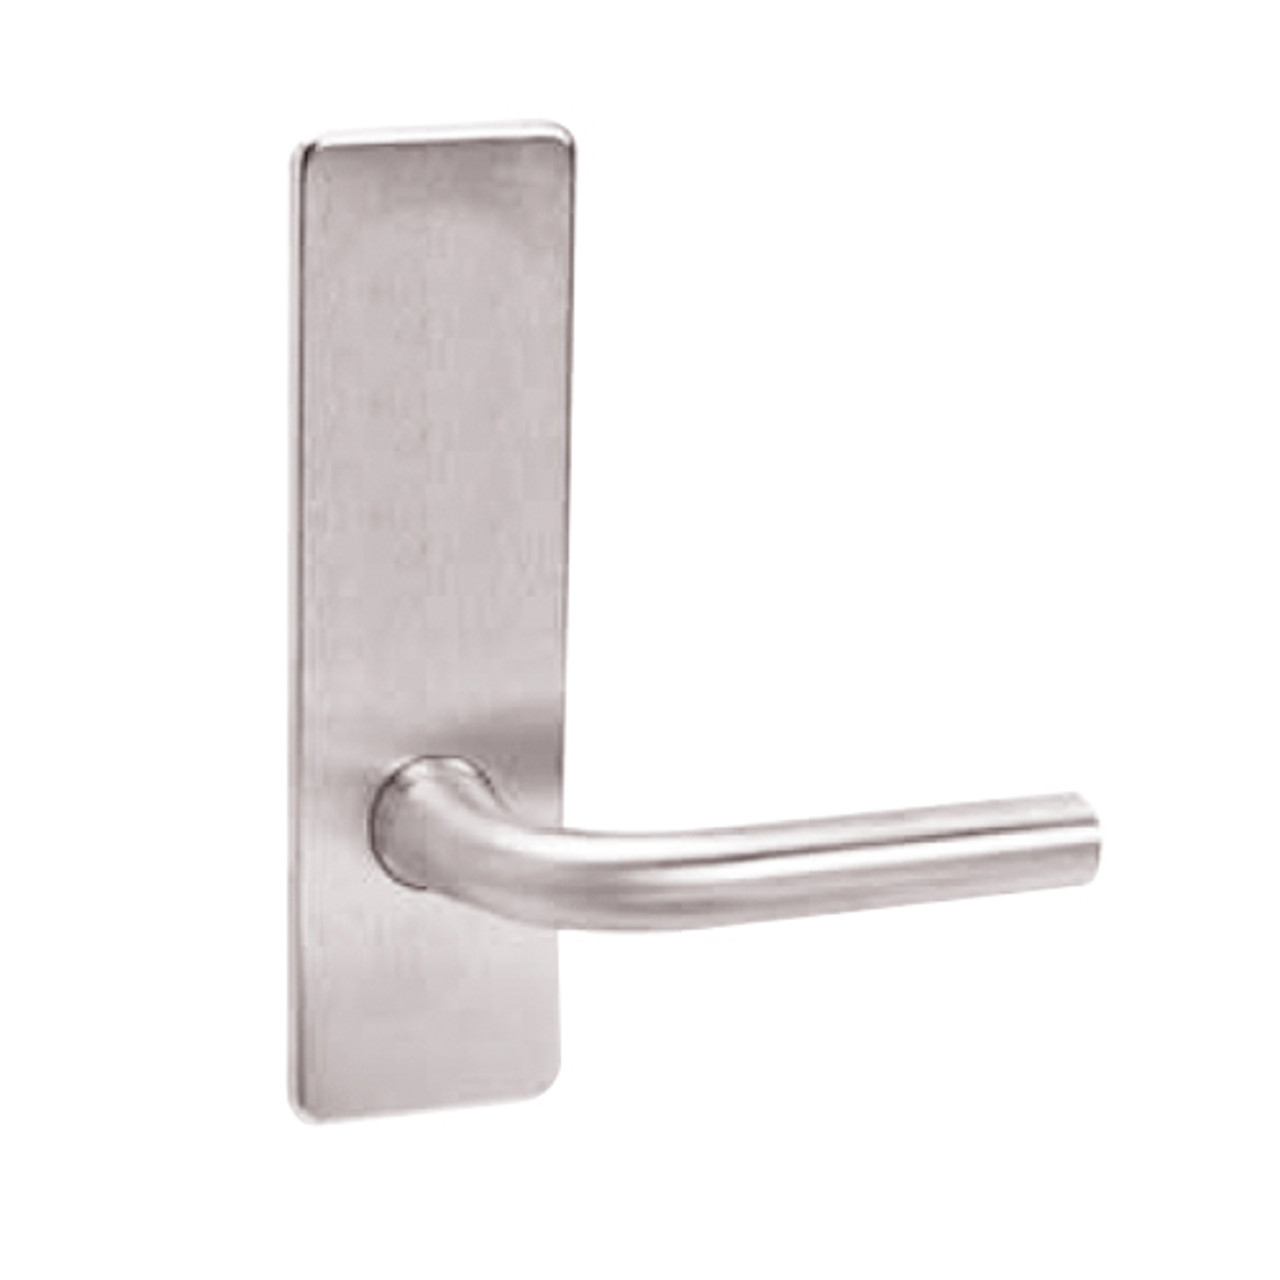 ML2010-RWR-629 Corbin Russwin ML2000 Series Mortise Passage Locksets with Regis Lever in Bright Stainless Steel